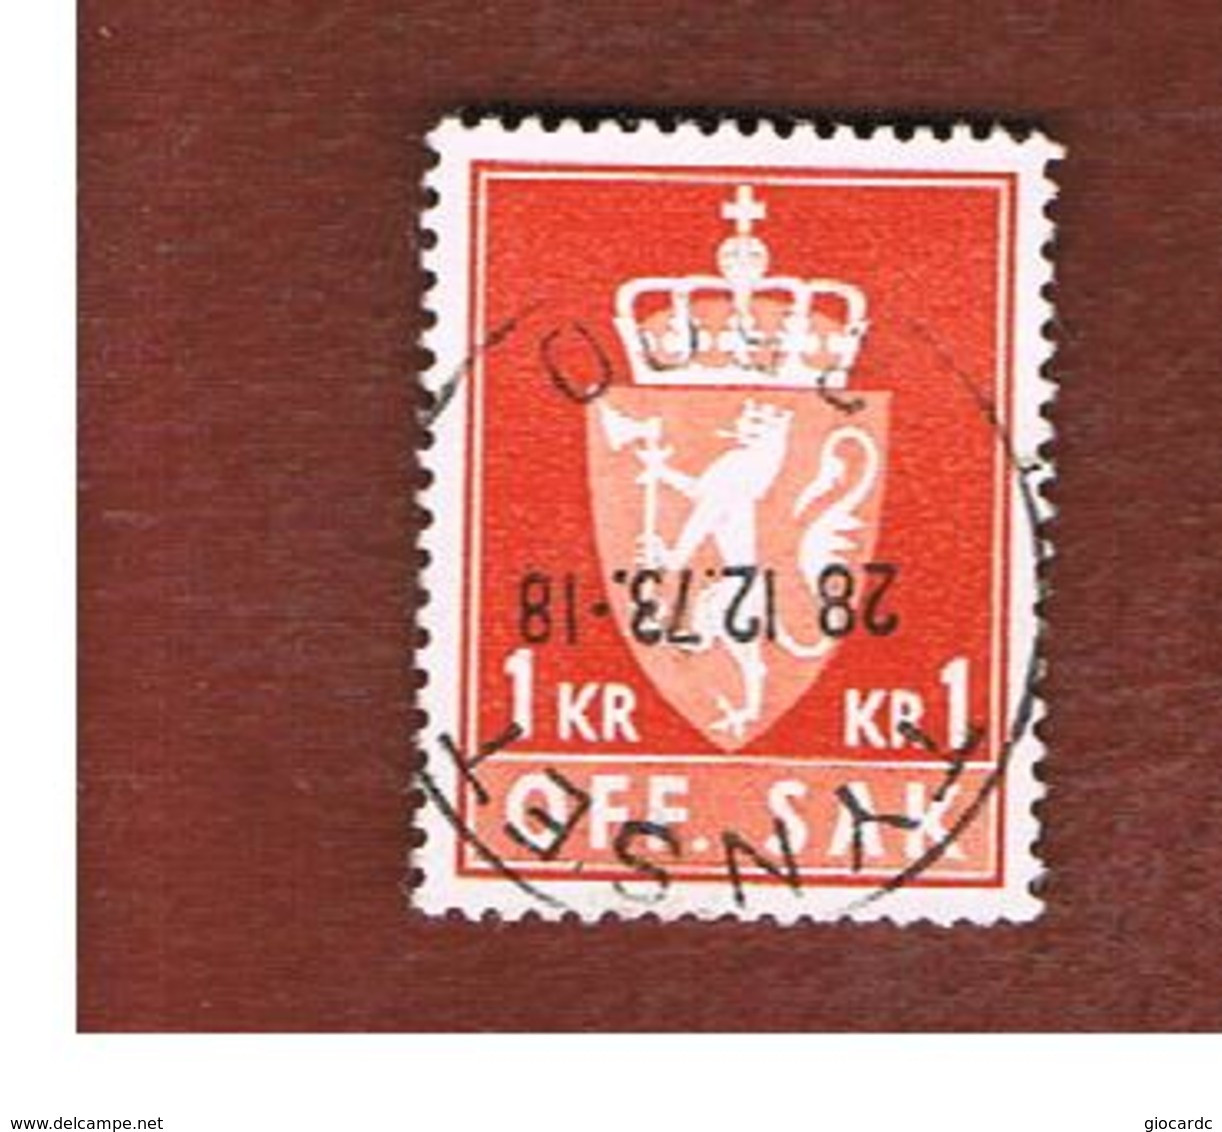 NORVEGIA (NORWAY) -   SG O485   -  1972  OFFICIAL STAMPS: ARM 1 KR RED       - USED° - Service